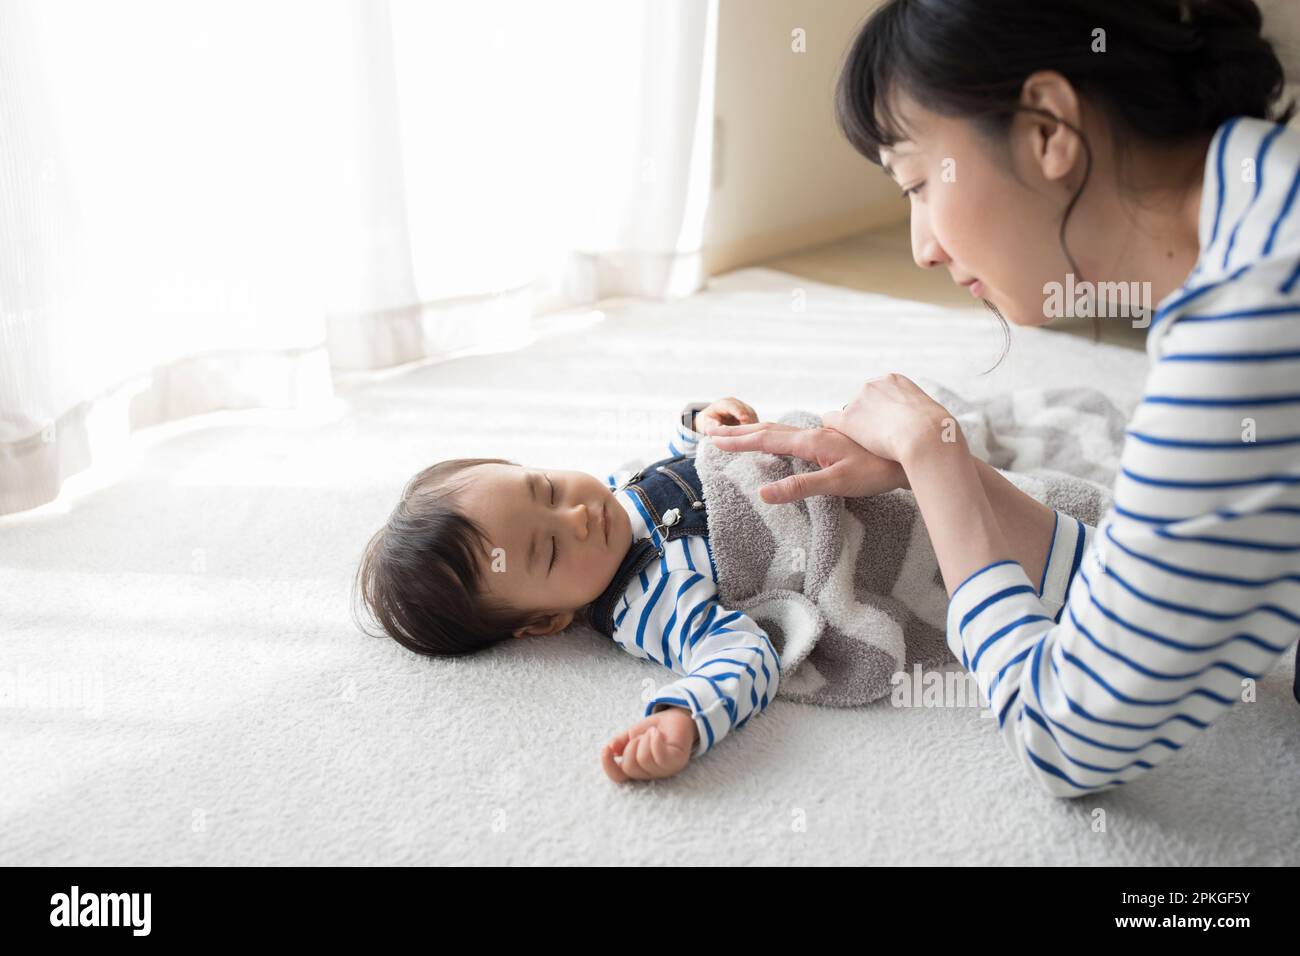 Mother napping with napping baby Stock Photo